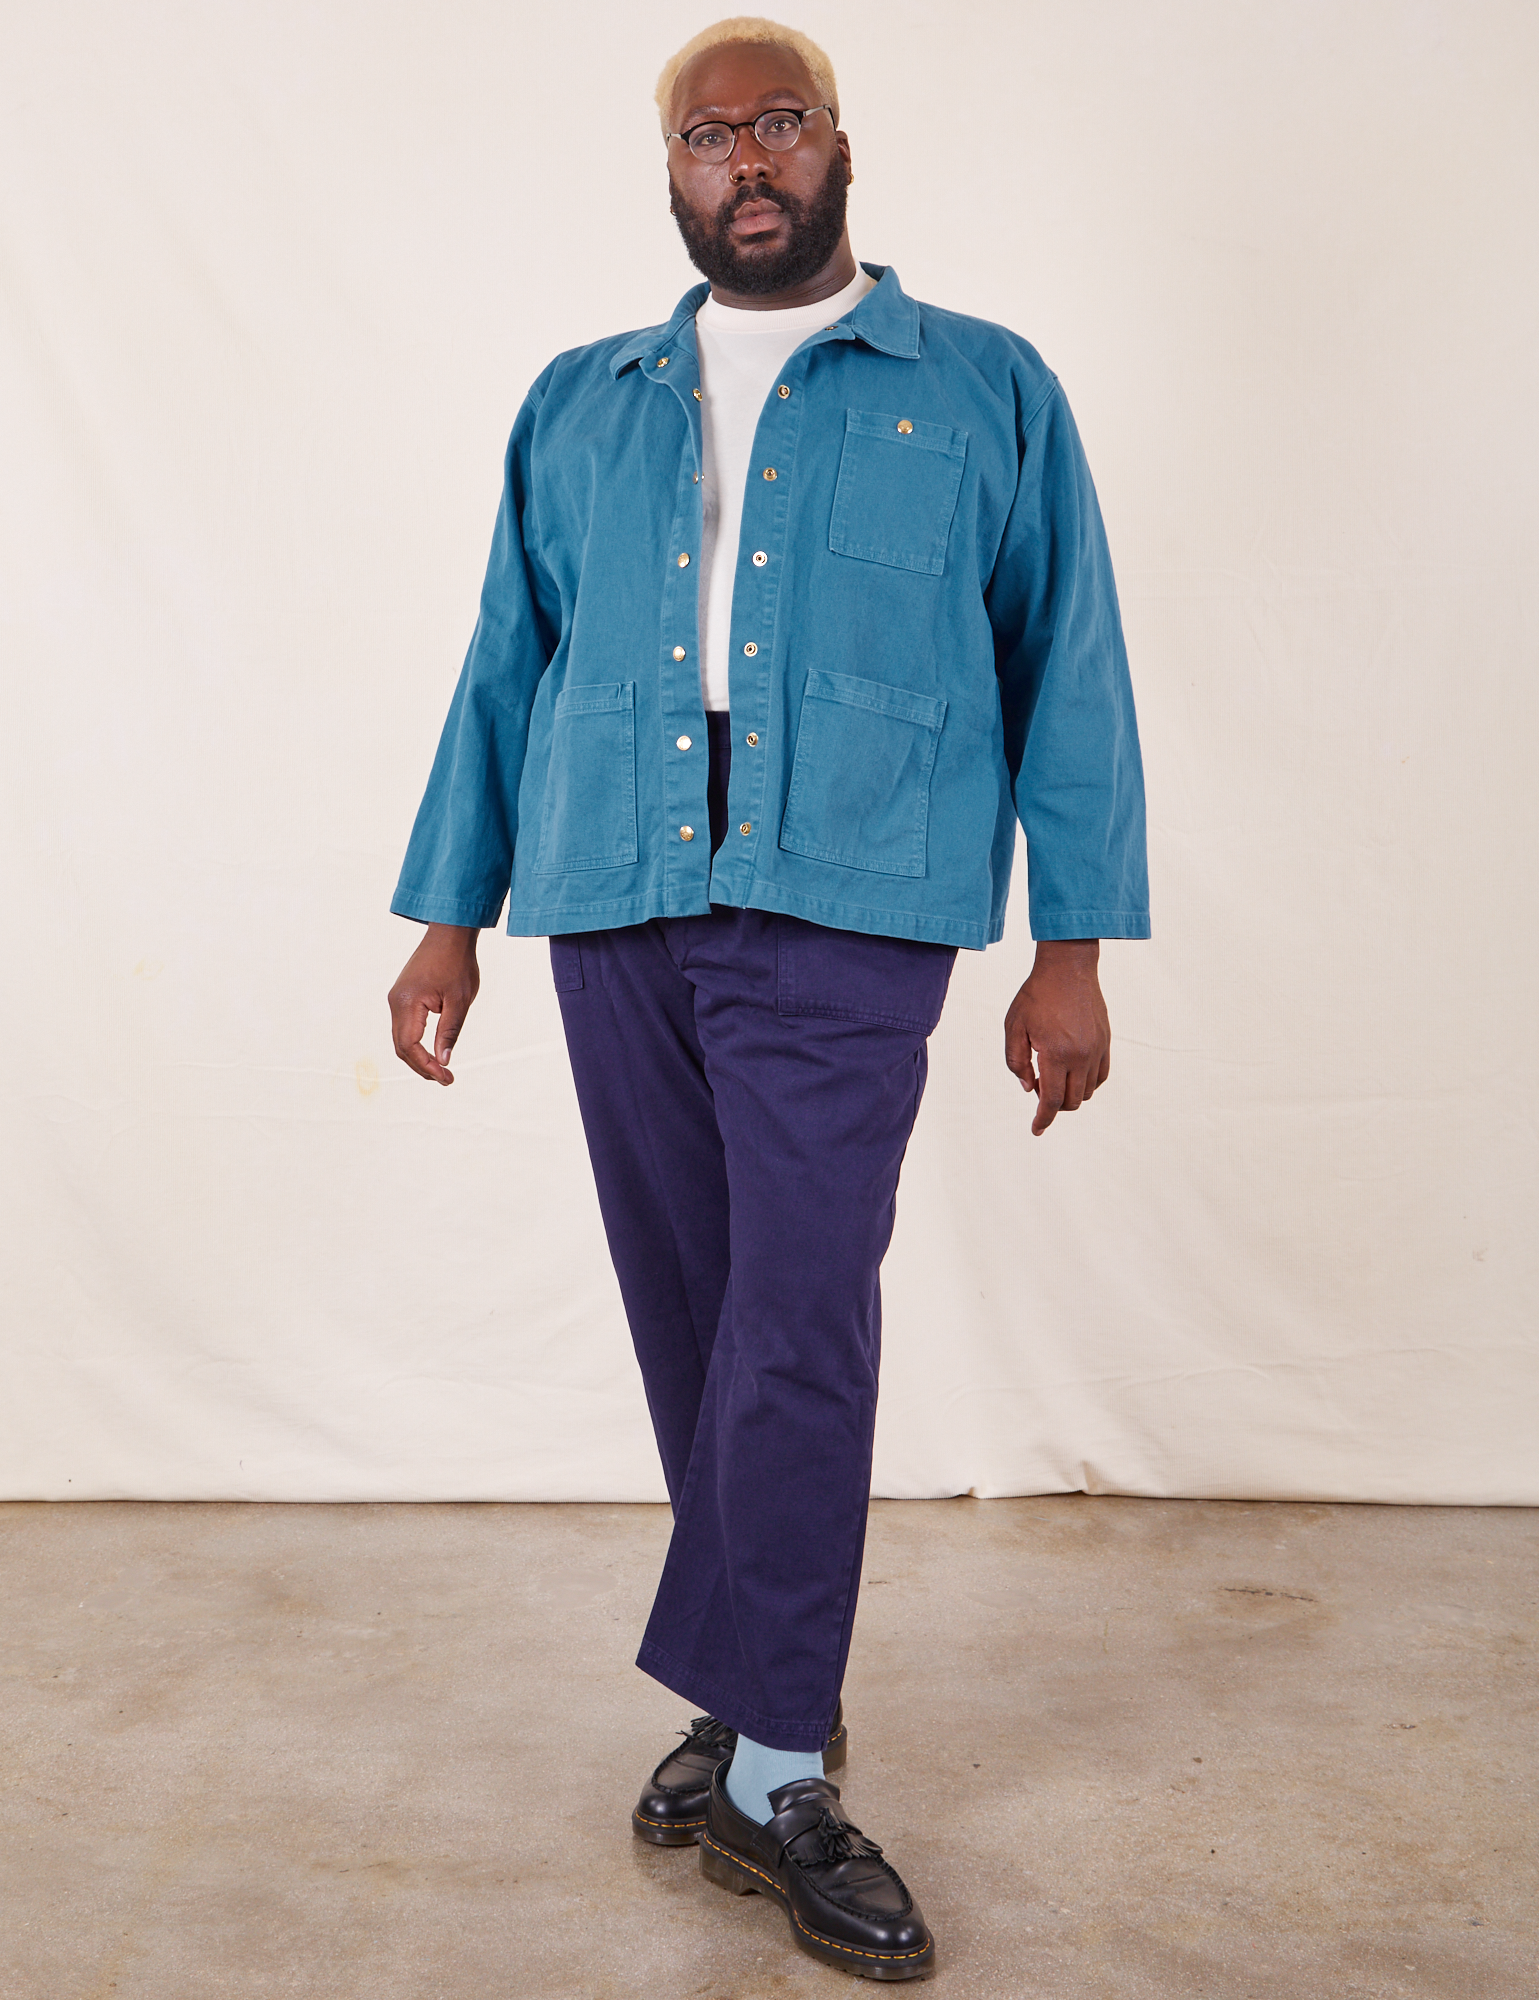 Elijah is 6&#39;4&quot; and wearing 3XL Denim Work Jacket in Marine Blue paired with navy Work Pants